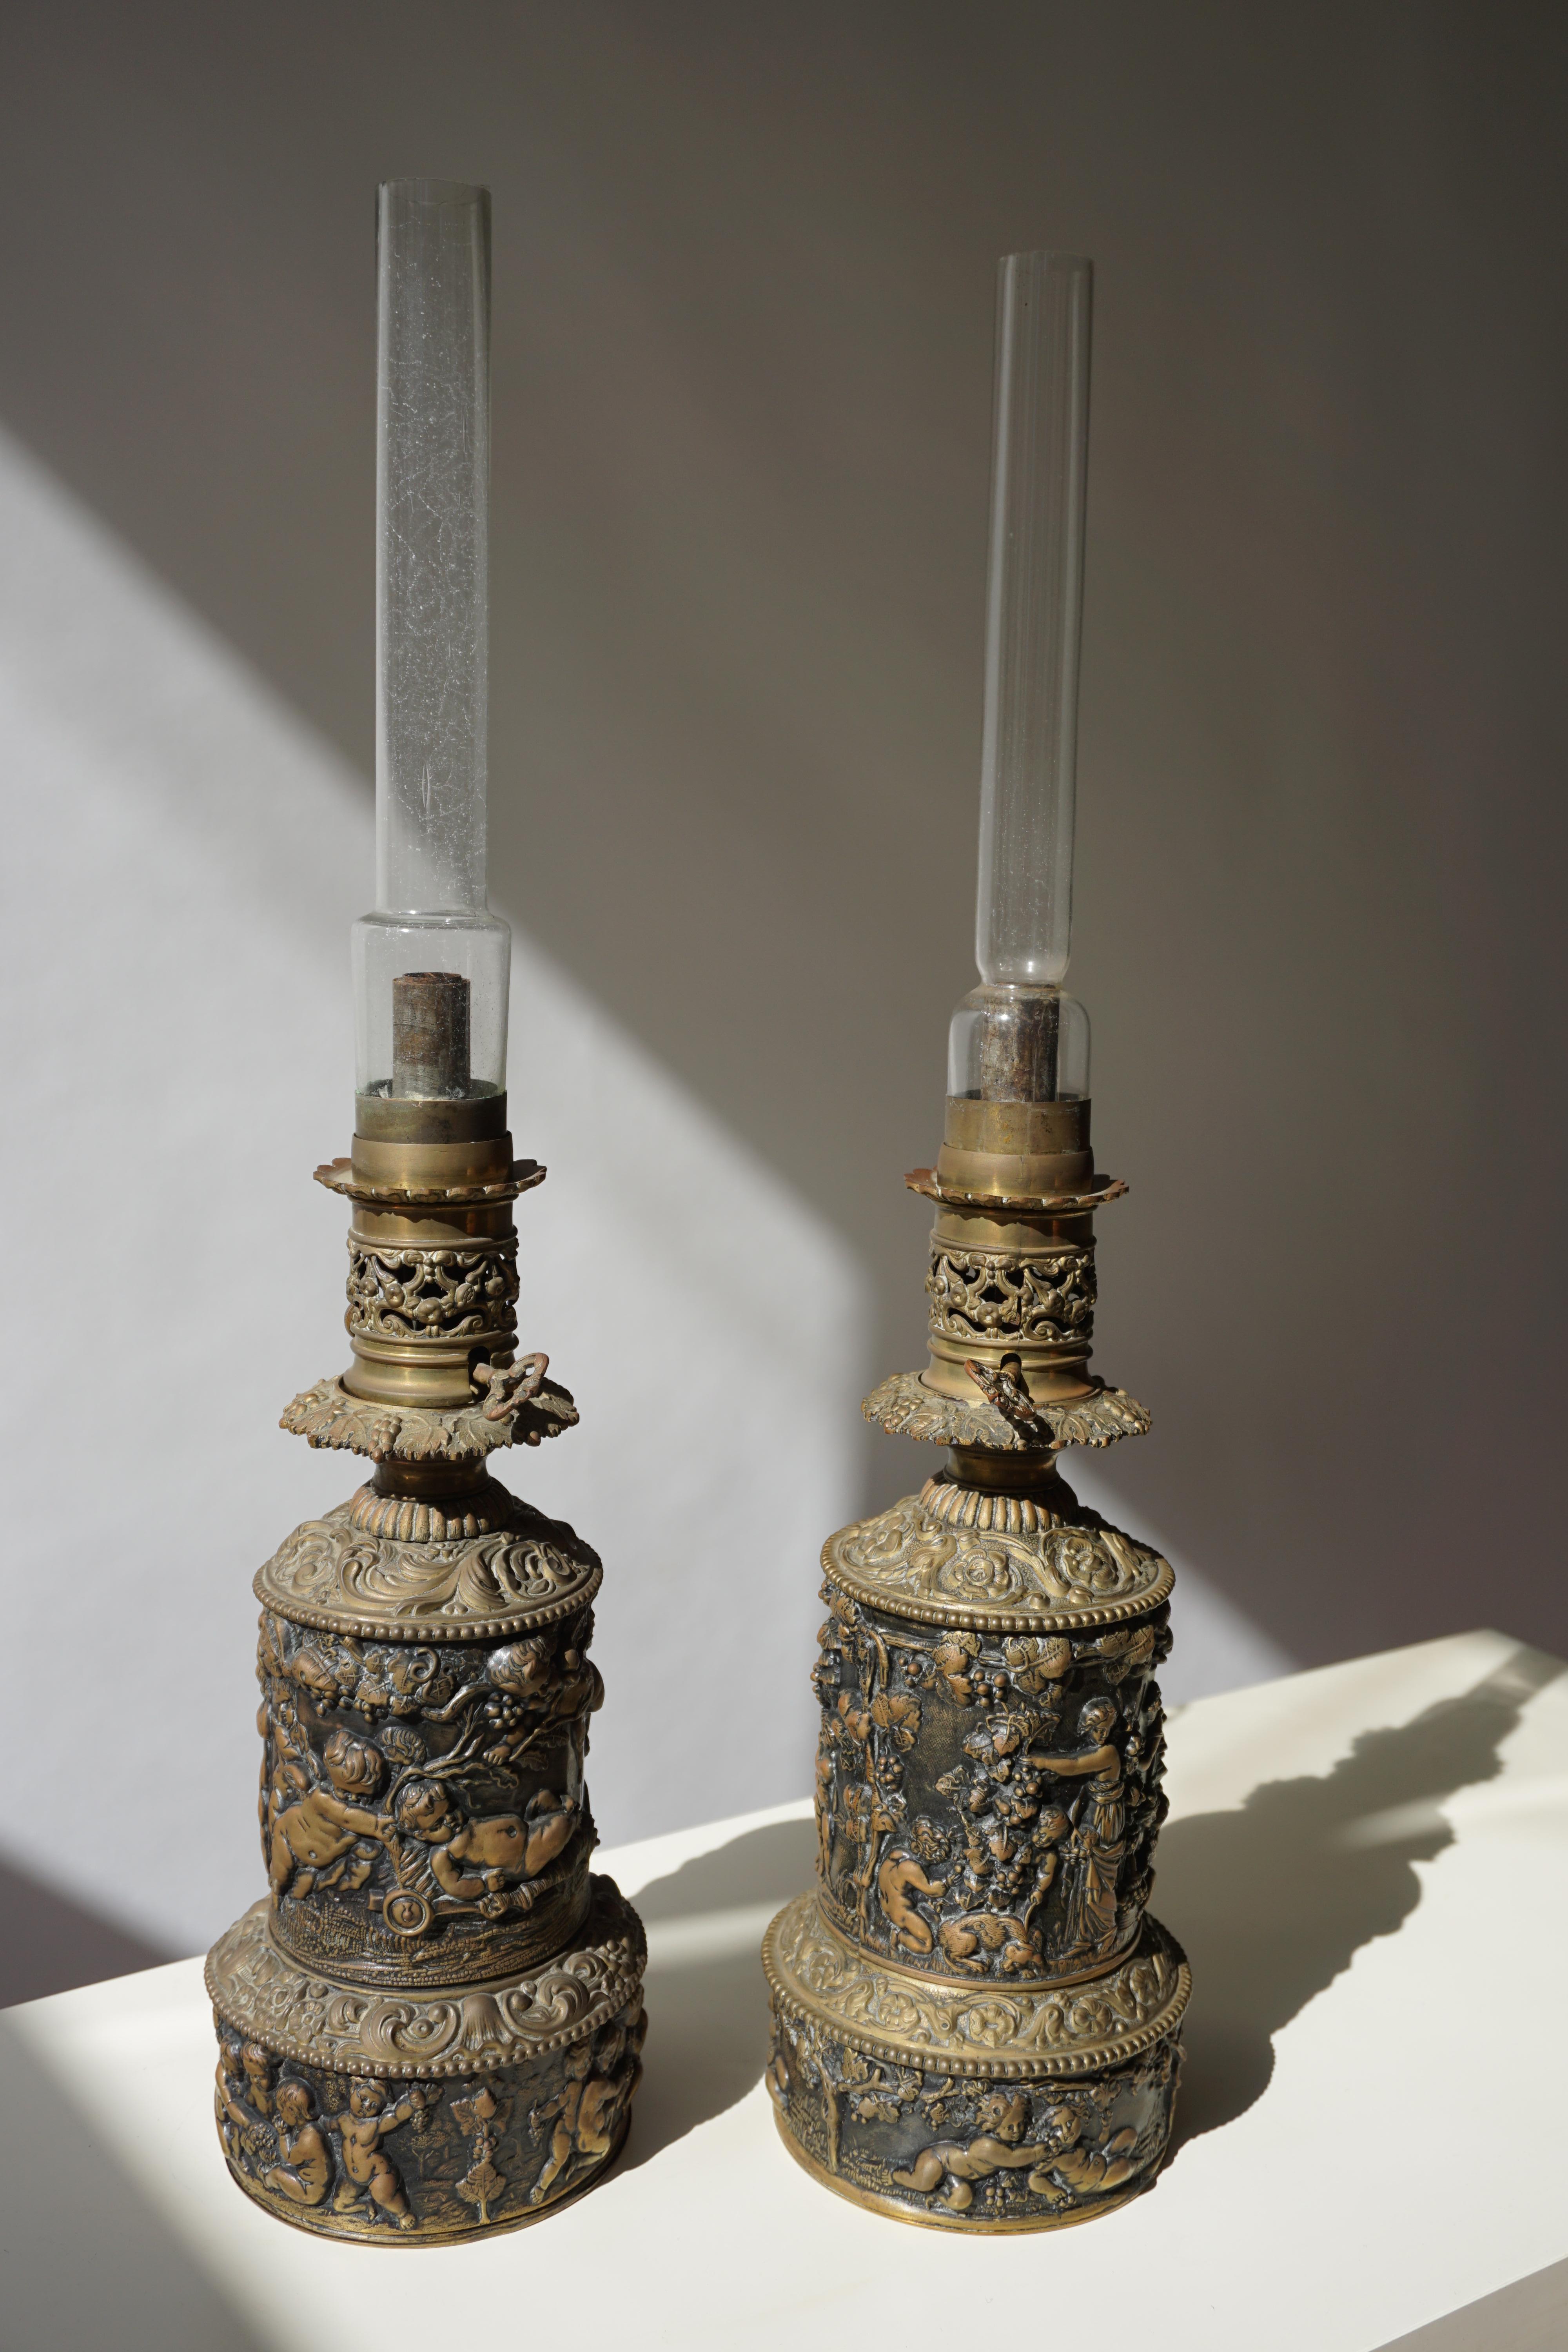 A pair of impressive / monumental Victorian copper sculptural oil table lamps showing putti figures / wingless cherubs with grape leaves and swirling vines. Paired with glass shade.They are not in a working condition.

Dimensions
Height base 35